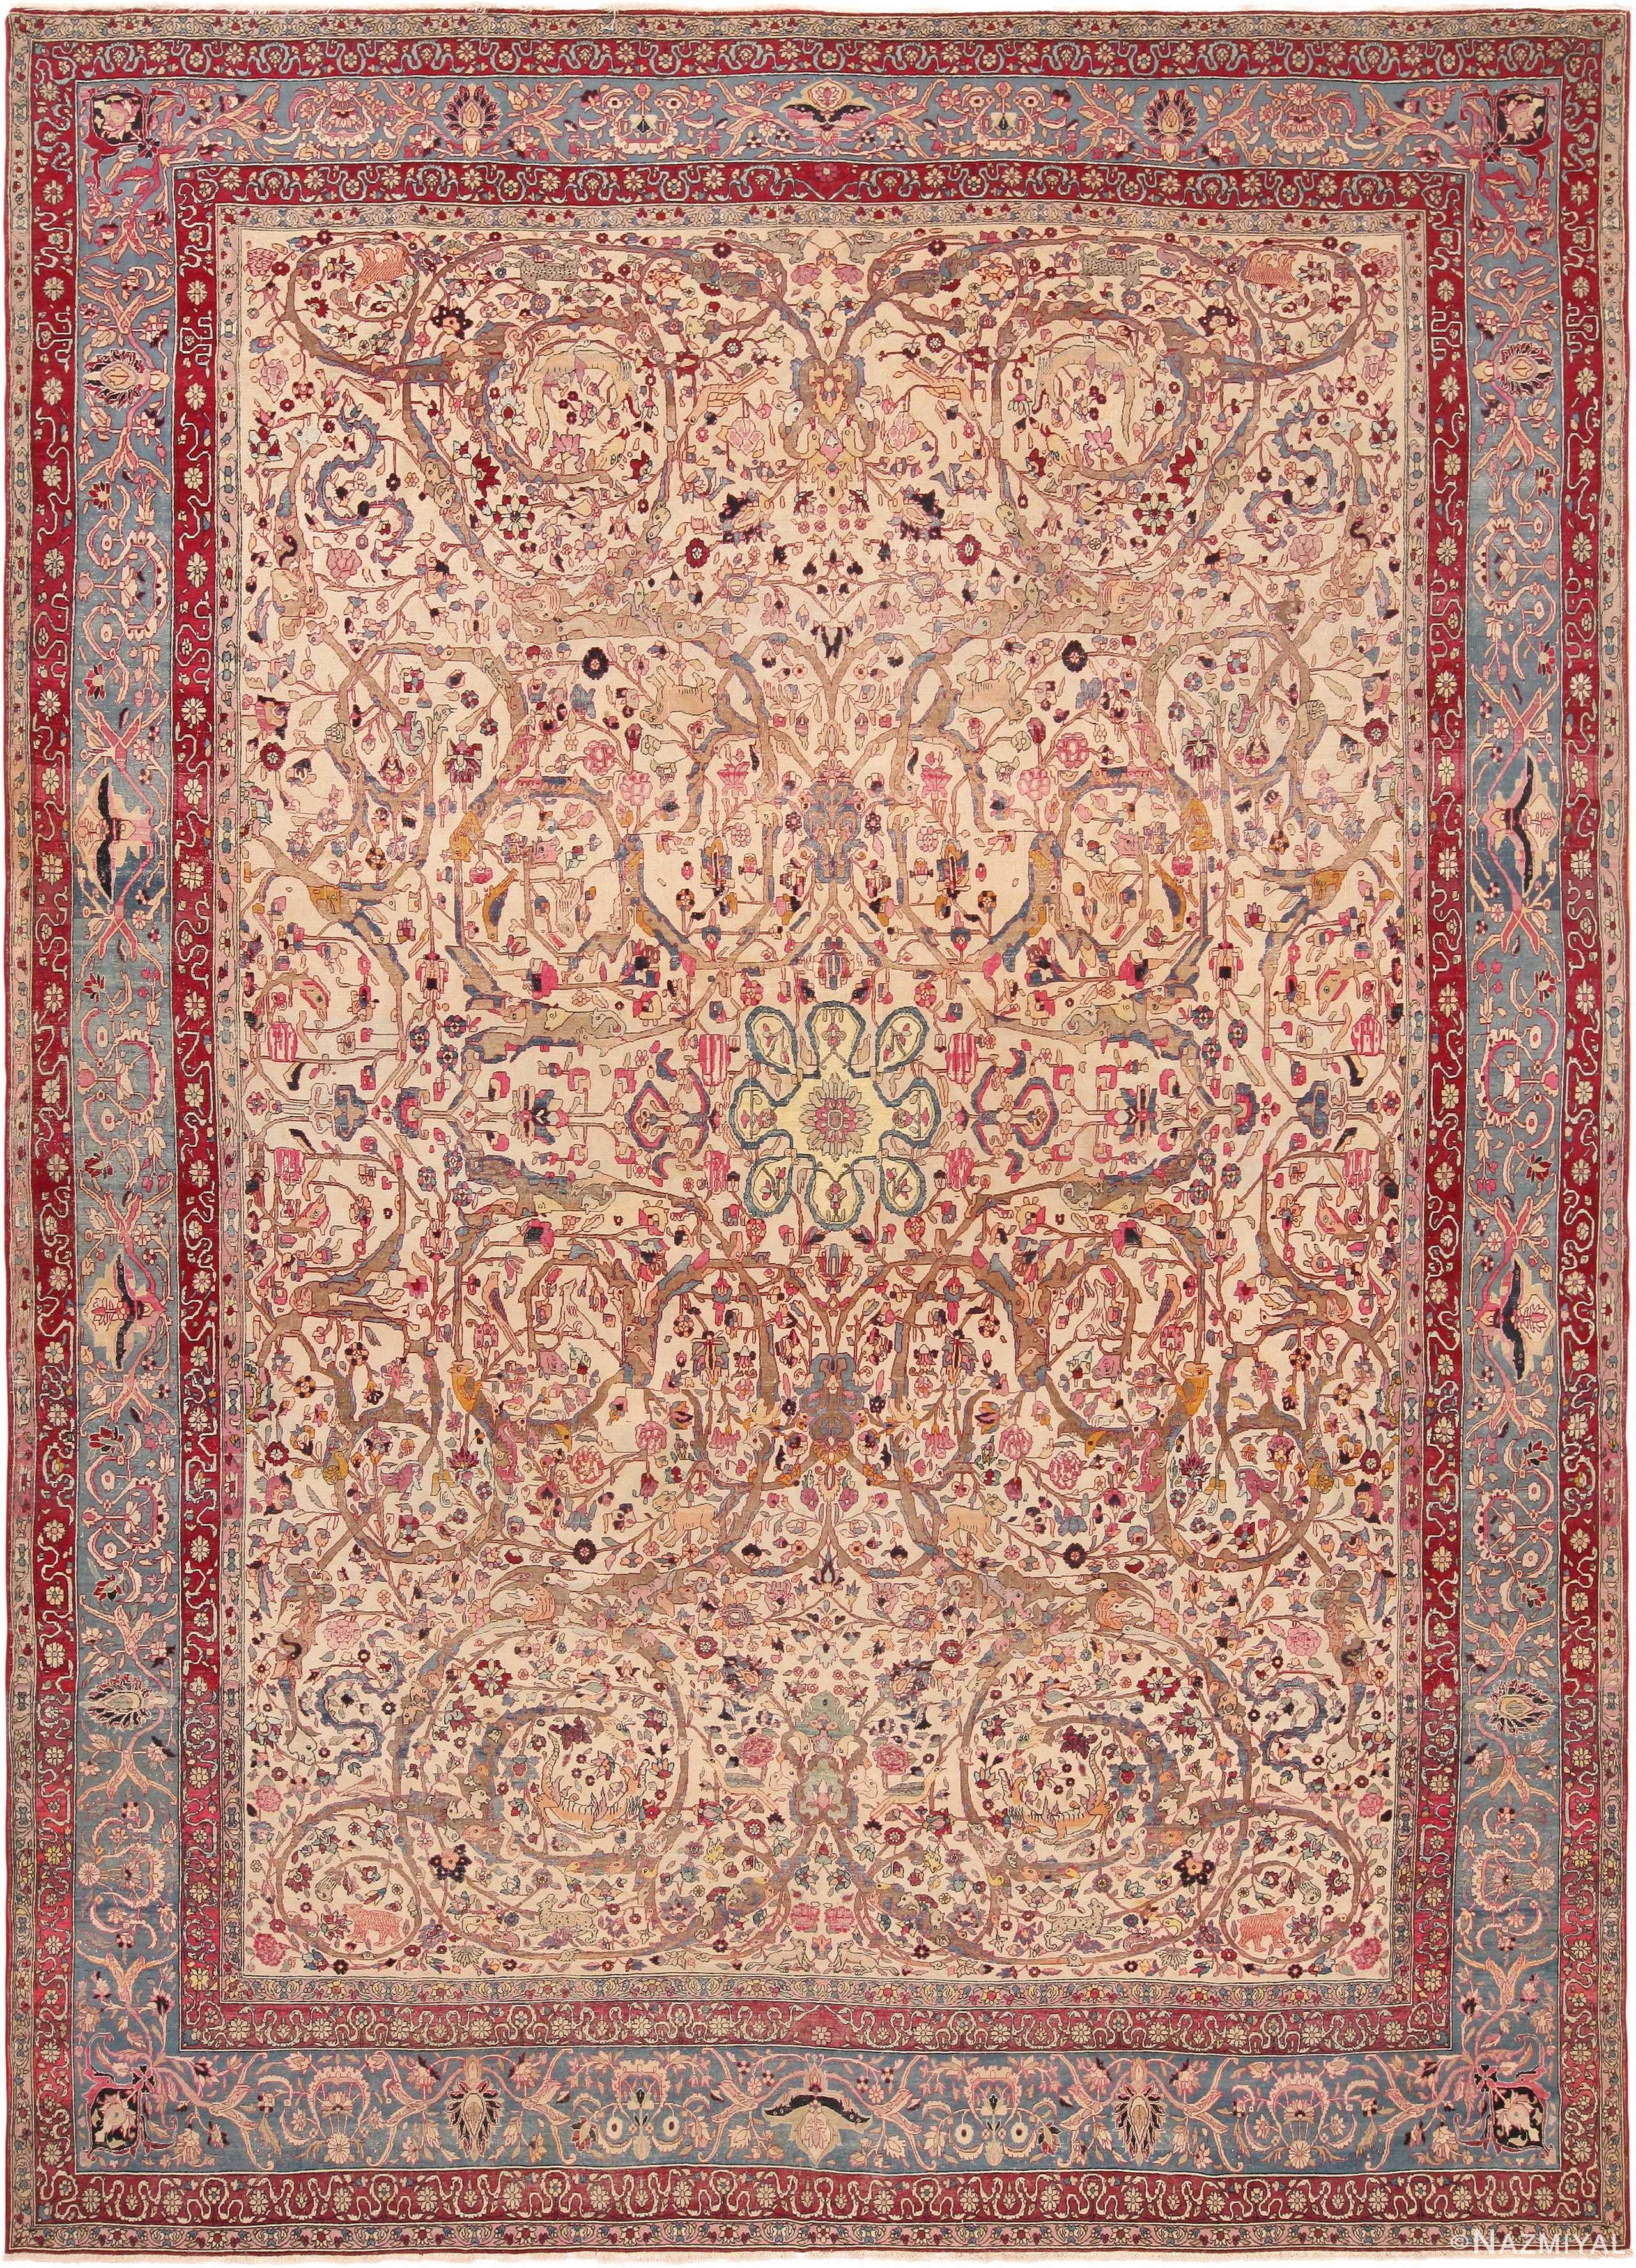 Antique Persian Tehran Area Rug 71106 by Nazmiyal Antique Rugs